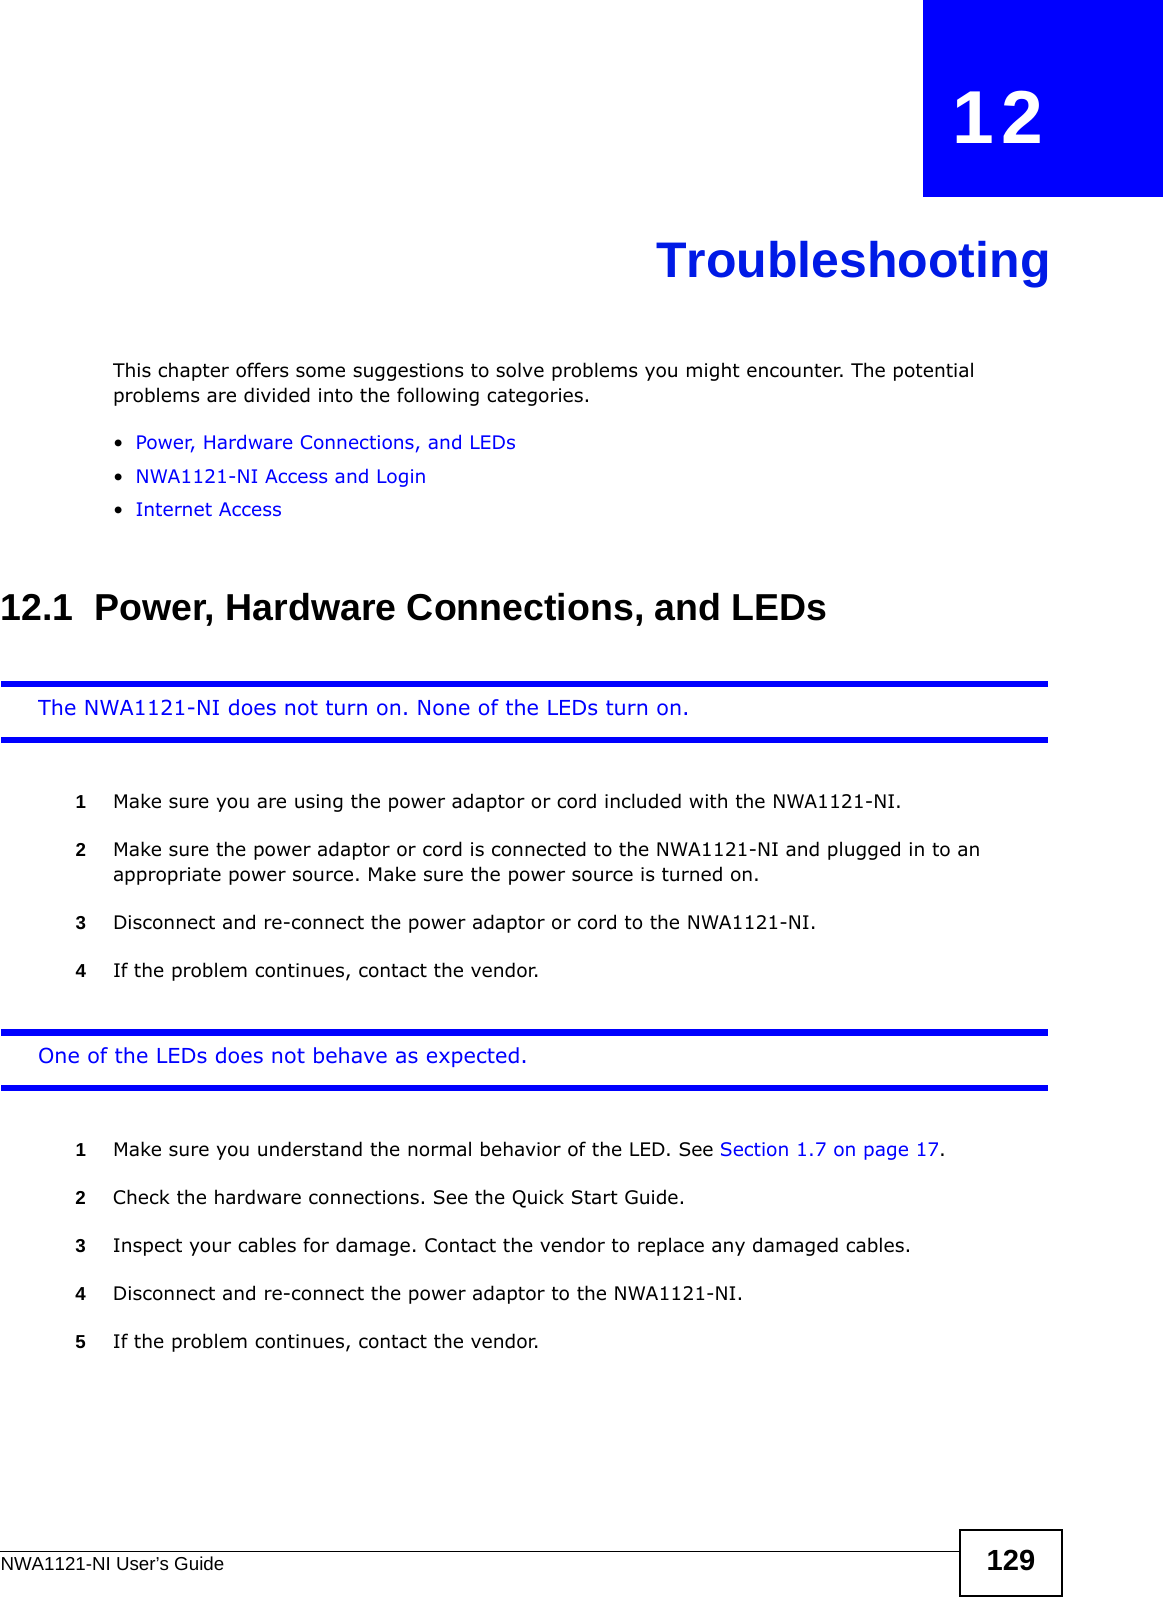 NWA1121-NI User’s Guide 129CHAPTER   12TroubleshootingThis chapter offers some suggestions to solve problems you might encounter. The potential problems are divided into the following categories.•Power, Hardware Connections, and LEDs•NWA1121-NI Access and Login•Internet Access12.1  Power, Hardware Connections, and LEDsThe NWA1121-NI does not turn on. None of the LEDs turn on.1Make sure you are using the power adaptor or cord included with the NWA1121-NI.2Make sure the power adaptor or cord is connected to the NWA1121-NI and plugged in to an appropriate power source. Make sure the power source is turned on.3Disconnect and re-connect the power adaptor or cord to the NWA1121-NI. 4If the problem continues, contact the vendor.One of the LEDs does not behave as expected.1Make sure you understand the normal behavior of the LED. See Section 1.7 on page 17.2Check the hardware connections. See the Quick Start Guide.3Inspect your cables for damage. Contact the vendor to replace any damaged cables.4Disconnect and re-connect the power adaptor to the NWA1121-NI. 5If the problem continues, contact the vendor.